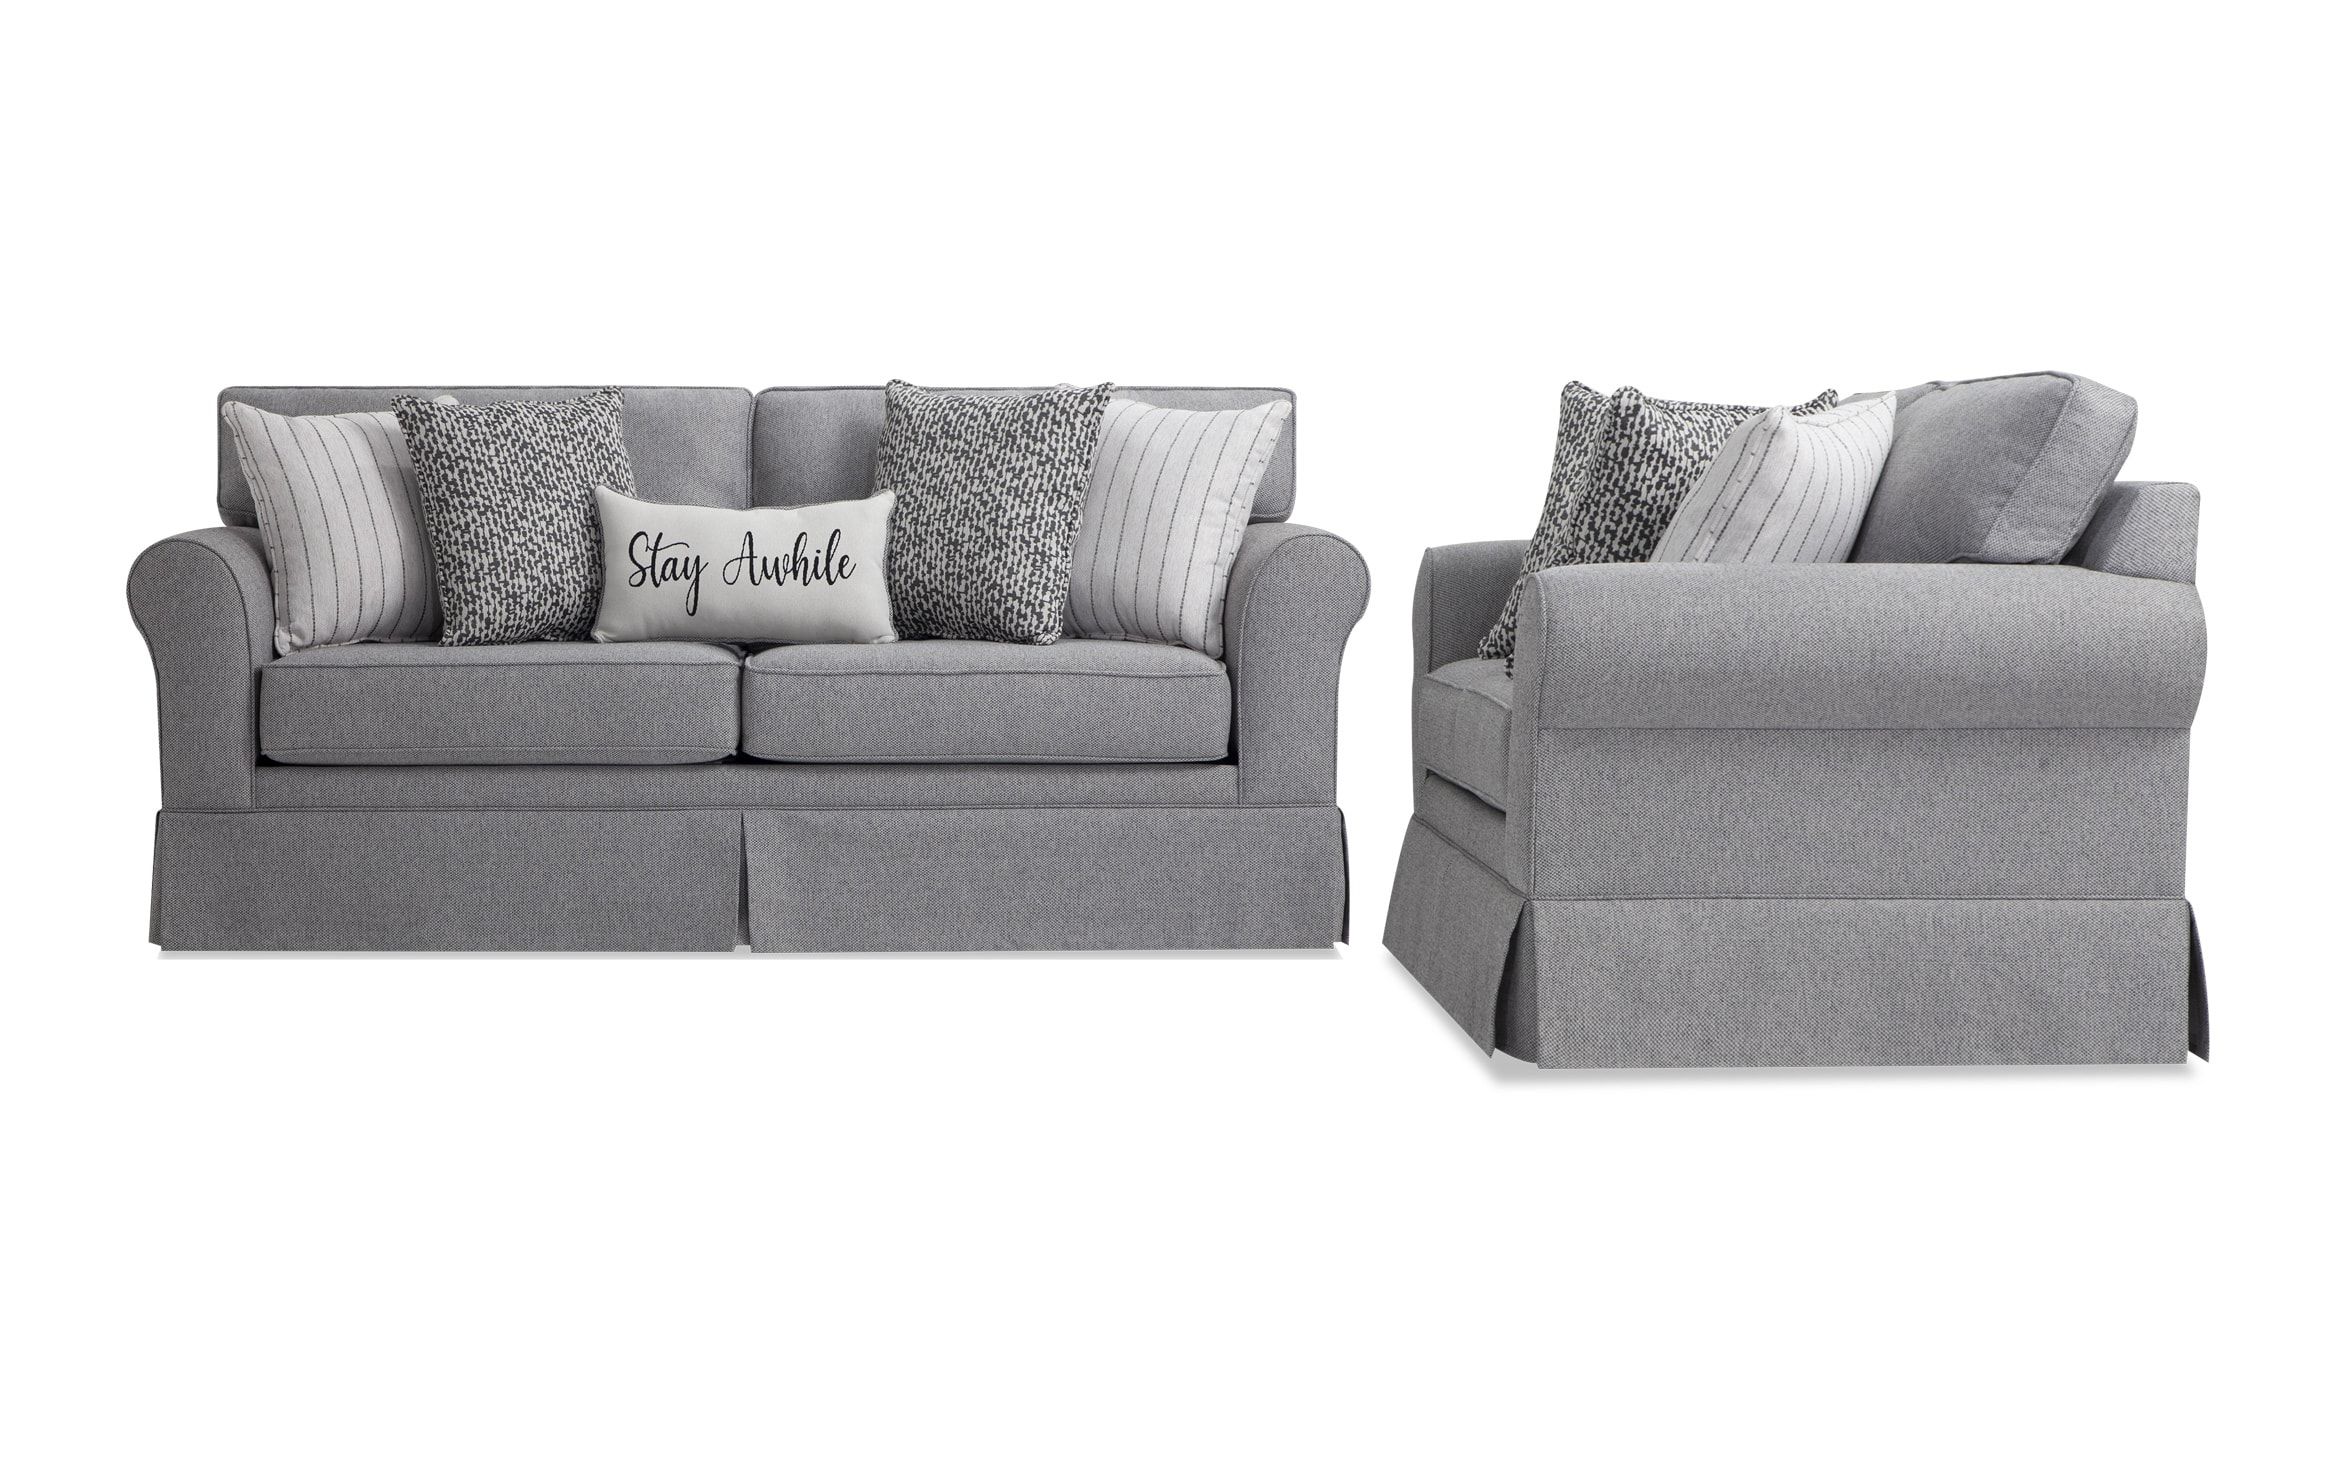 Bobs Furniture Sofa And Loveseat Sets | Baci Living Room For Scarlett Beige Sofas (View 3 of 15)